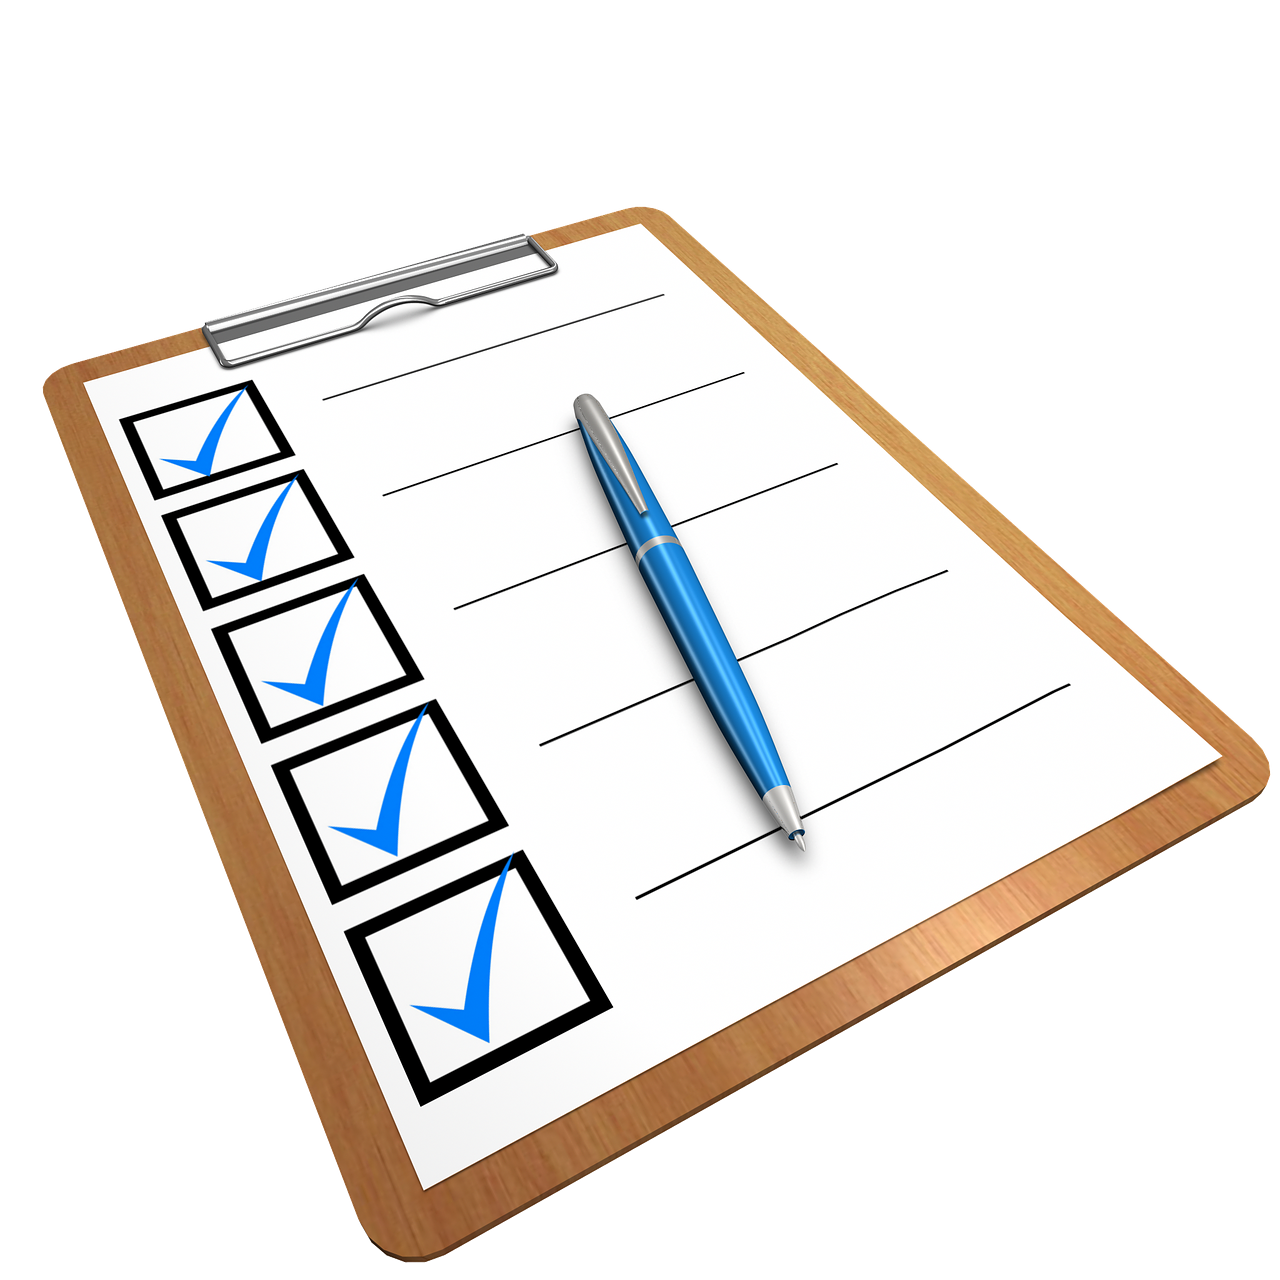 Get your checklist ready when buying a home